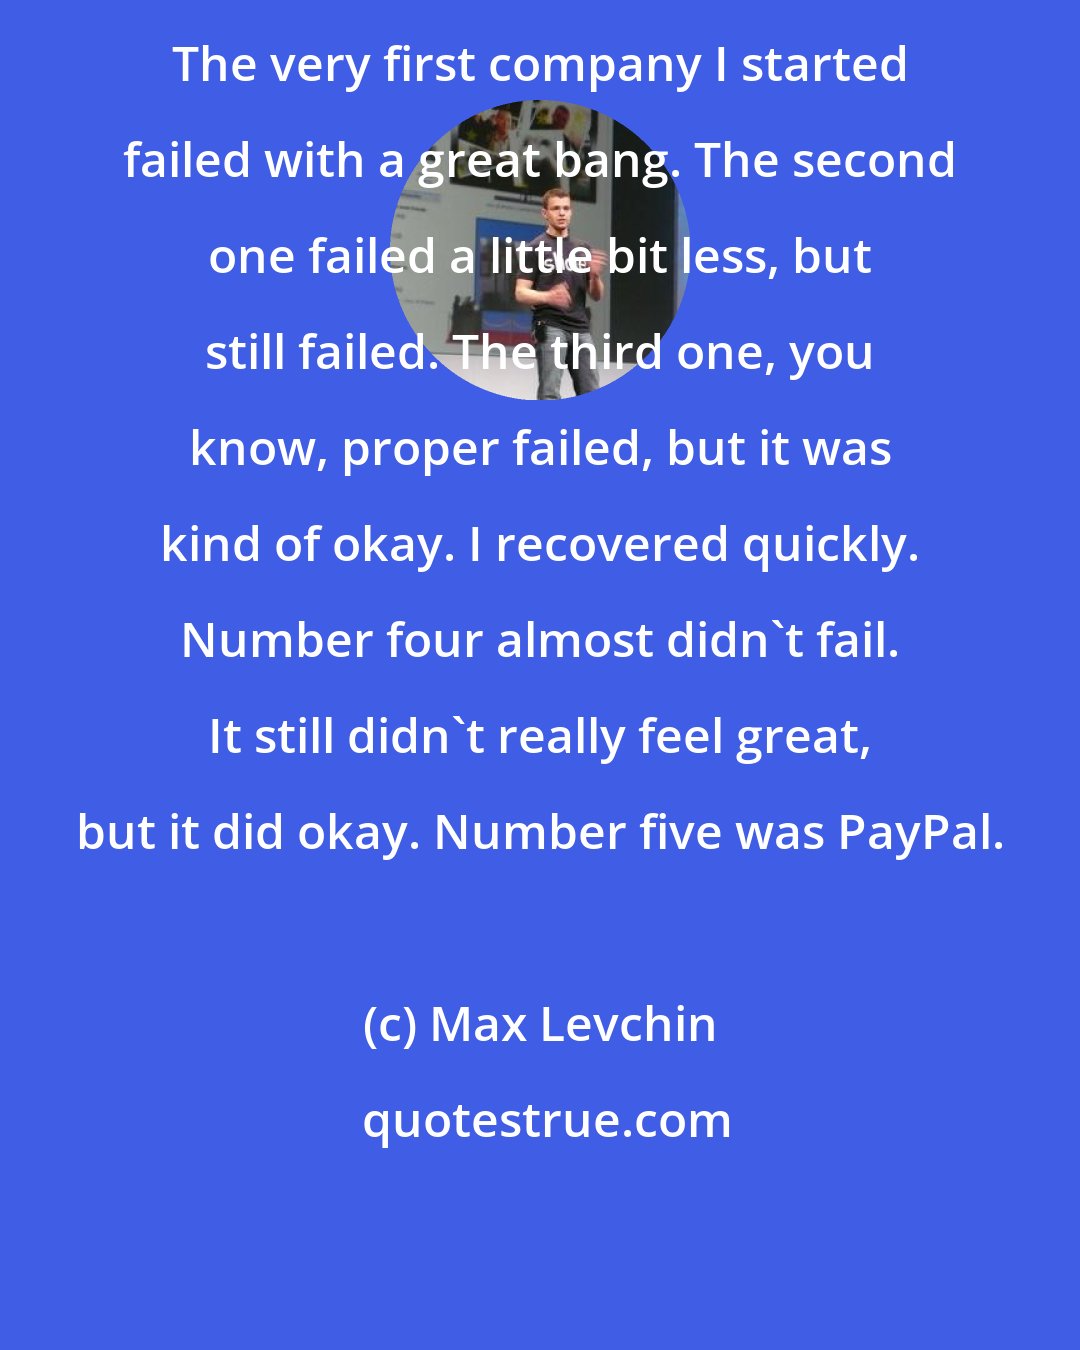 Max Levchin: The very first company I started failed with a great bang. The second one failed a little bit less, but still failed. The third one, you know, proper failed, but it was kind of okay. I recovered quickly. Number four almost didn't fail. It still didn't really feel great, but it did okay. Number five was PayPal.